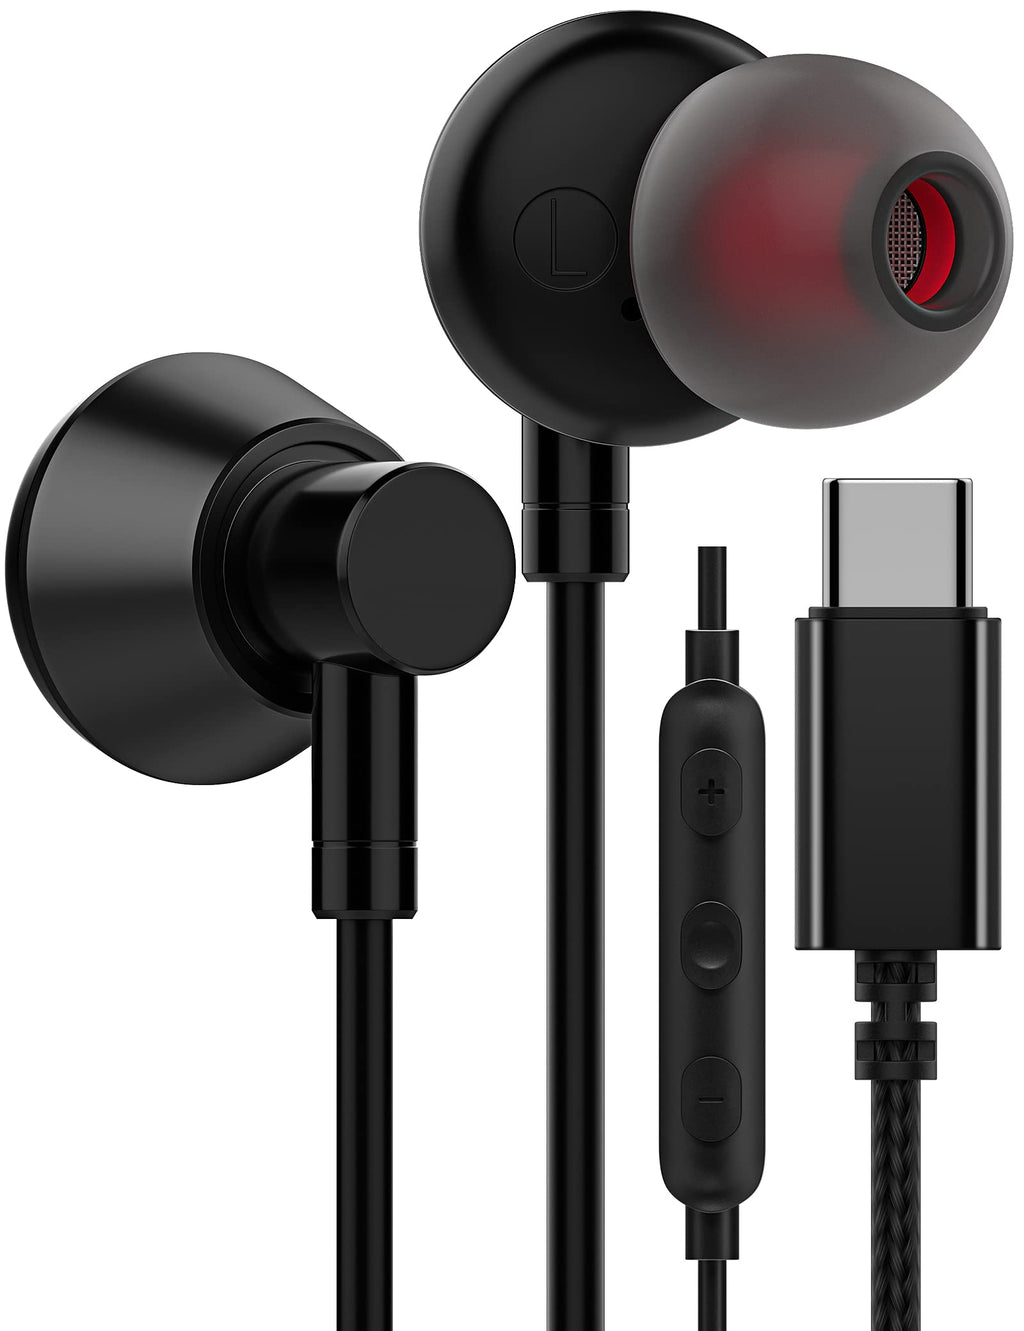 USB C Headphones, USB Type C Earphone Stereo in-Ear Earbuds Digital DAC Bass Noise Cancelling Headsets w/h Mic & Remote Control for Samsung Galaxy S22 S21 FE S20+ Ultra Google Pixel iPad Pro OnePlus